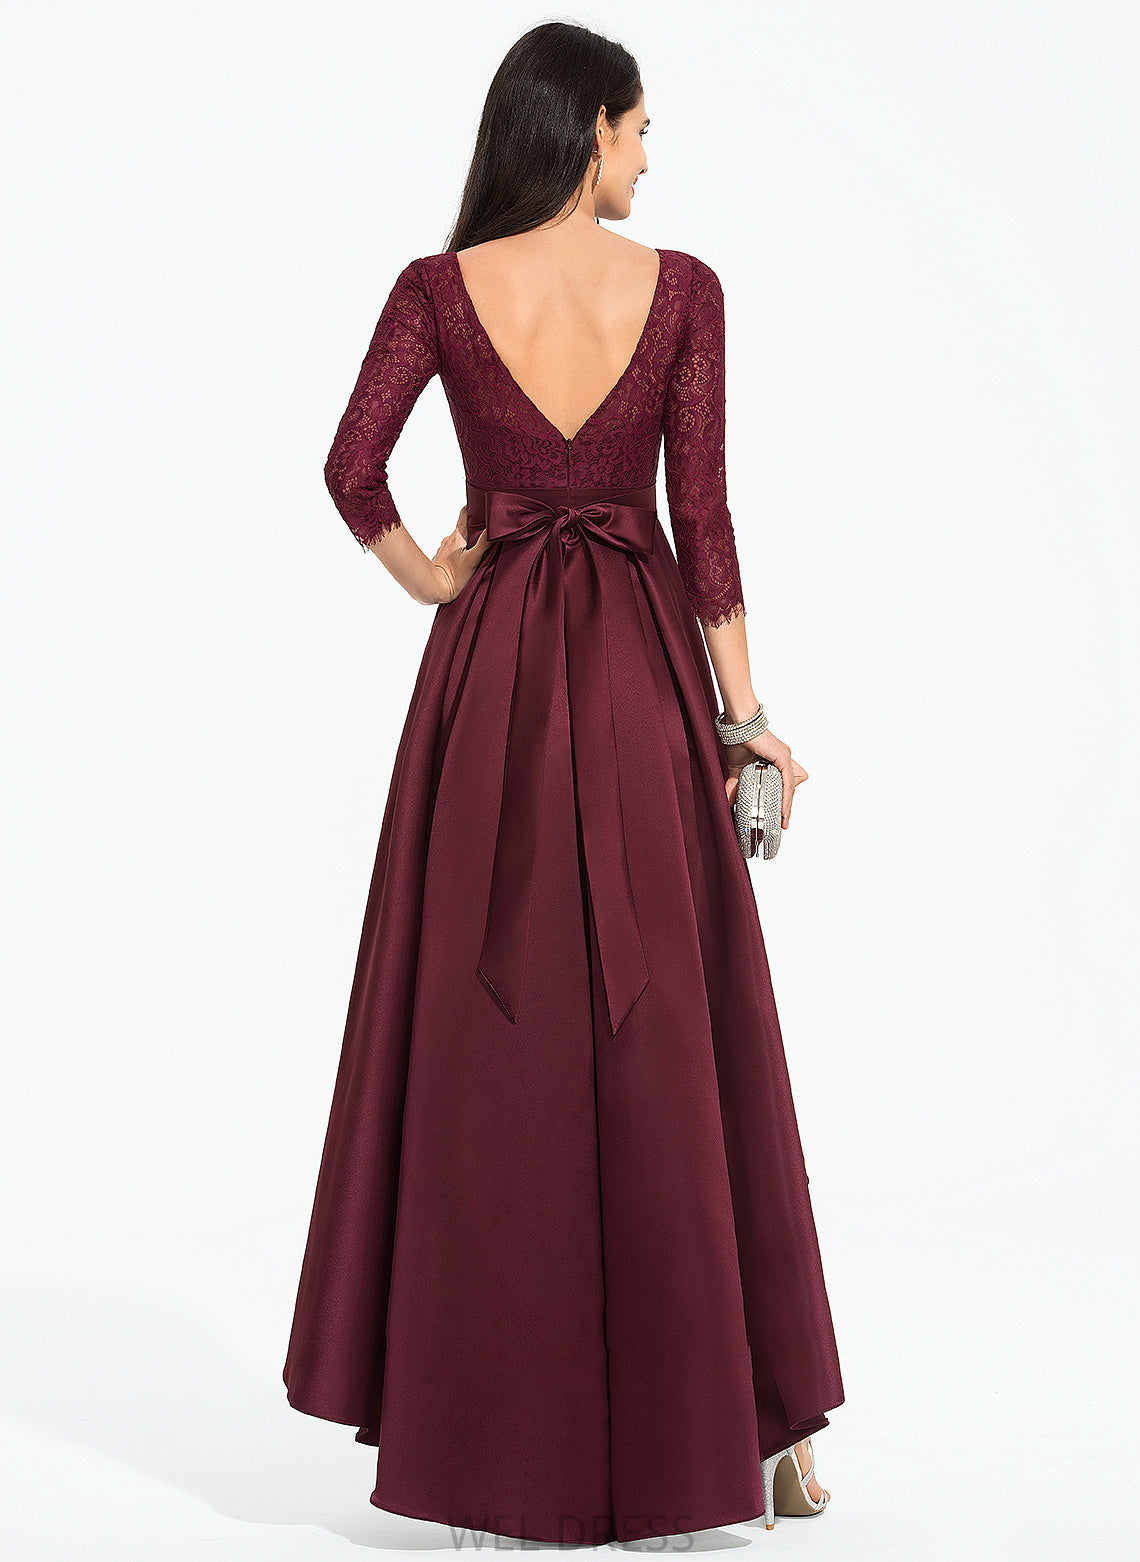 With Scoop Asymmetrical Ball-Gown/Princess Satin Neck Bow(s) Saniyah Prom Dresses